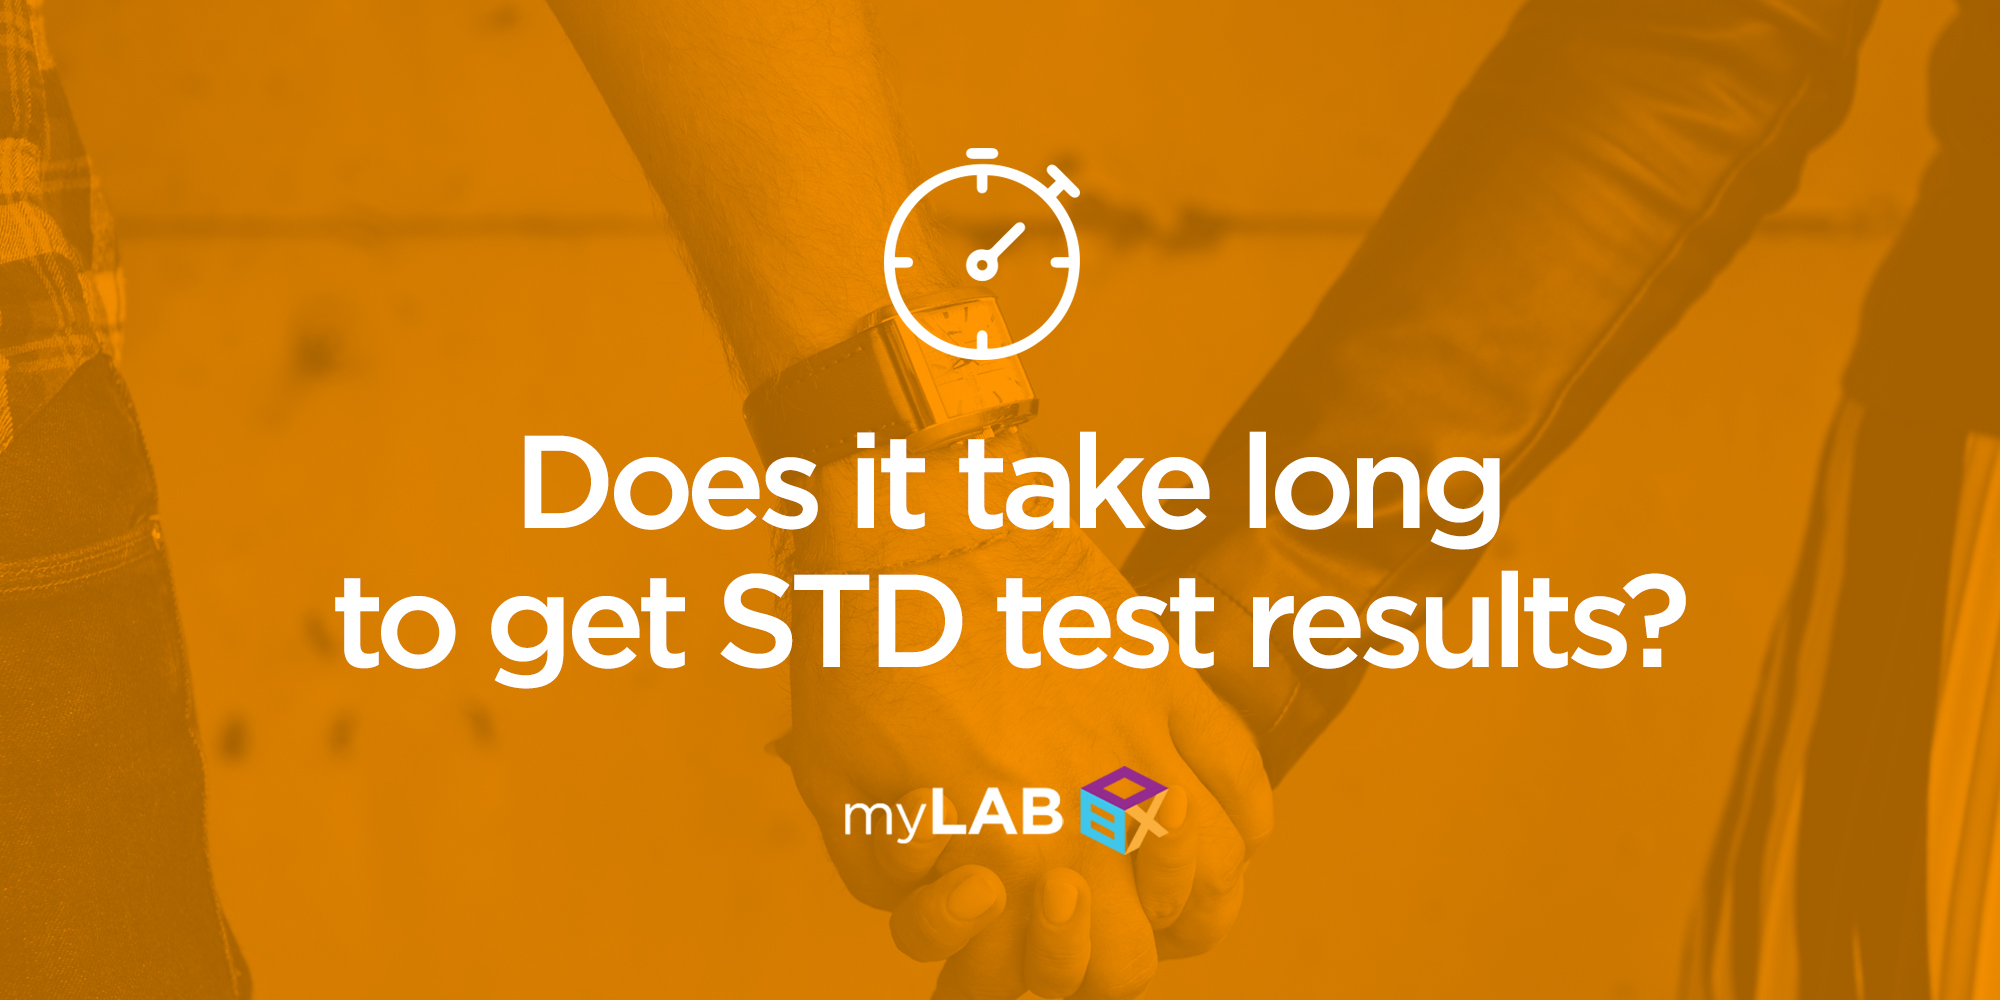 Does it take long to get STD test results?